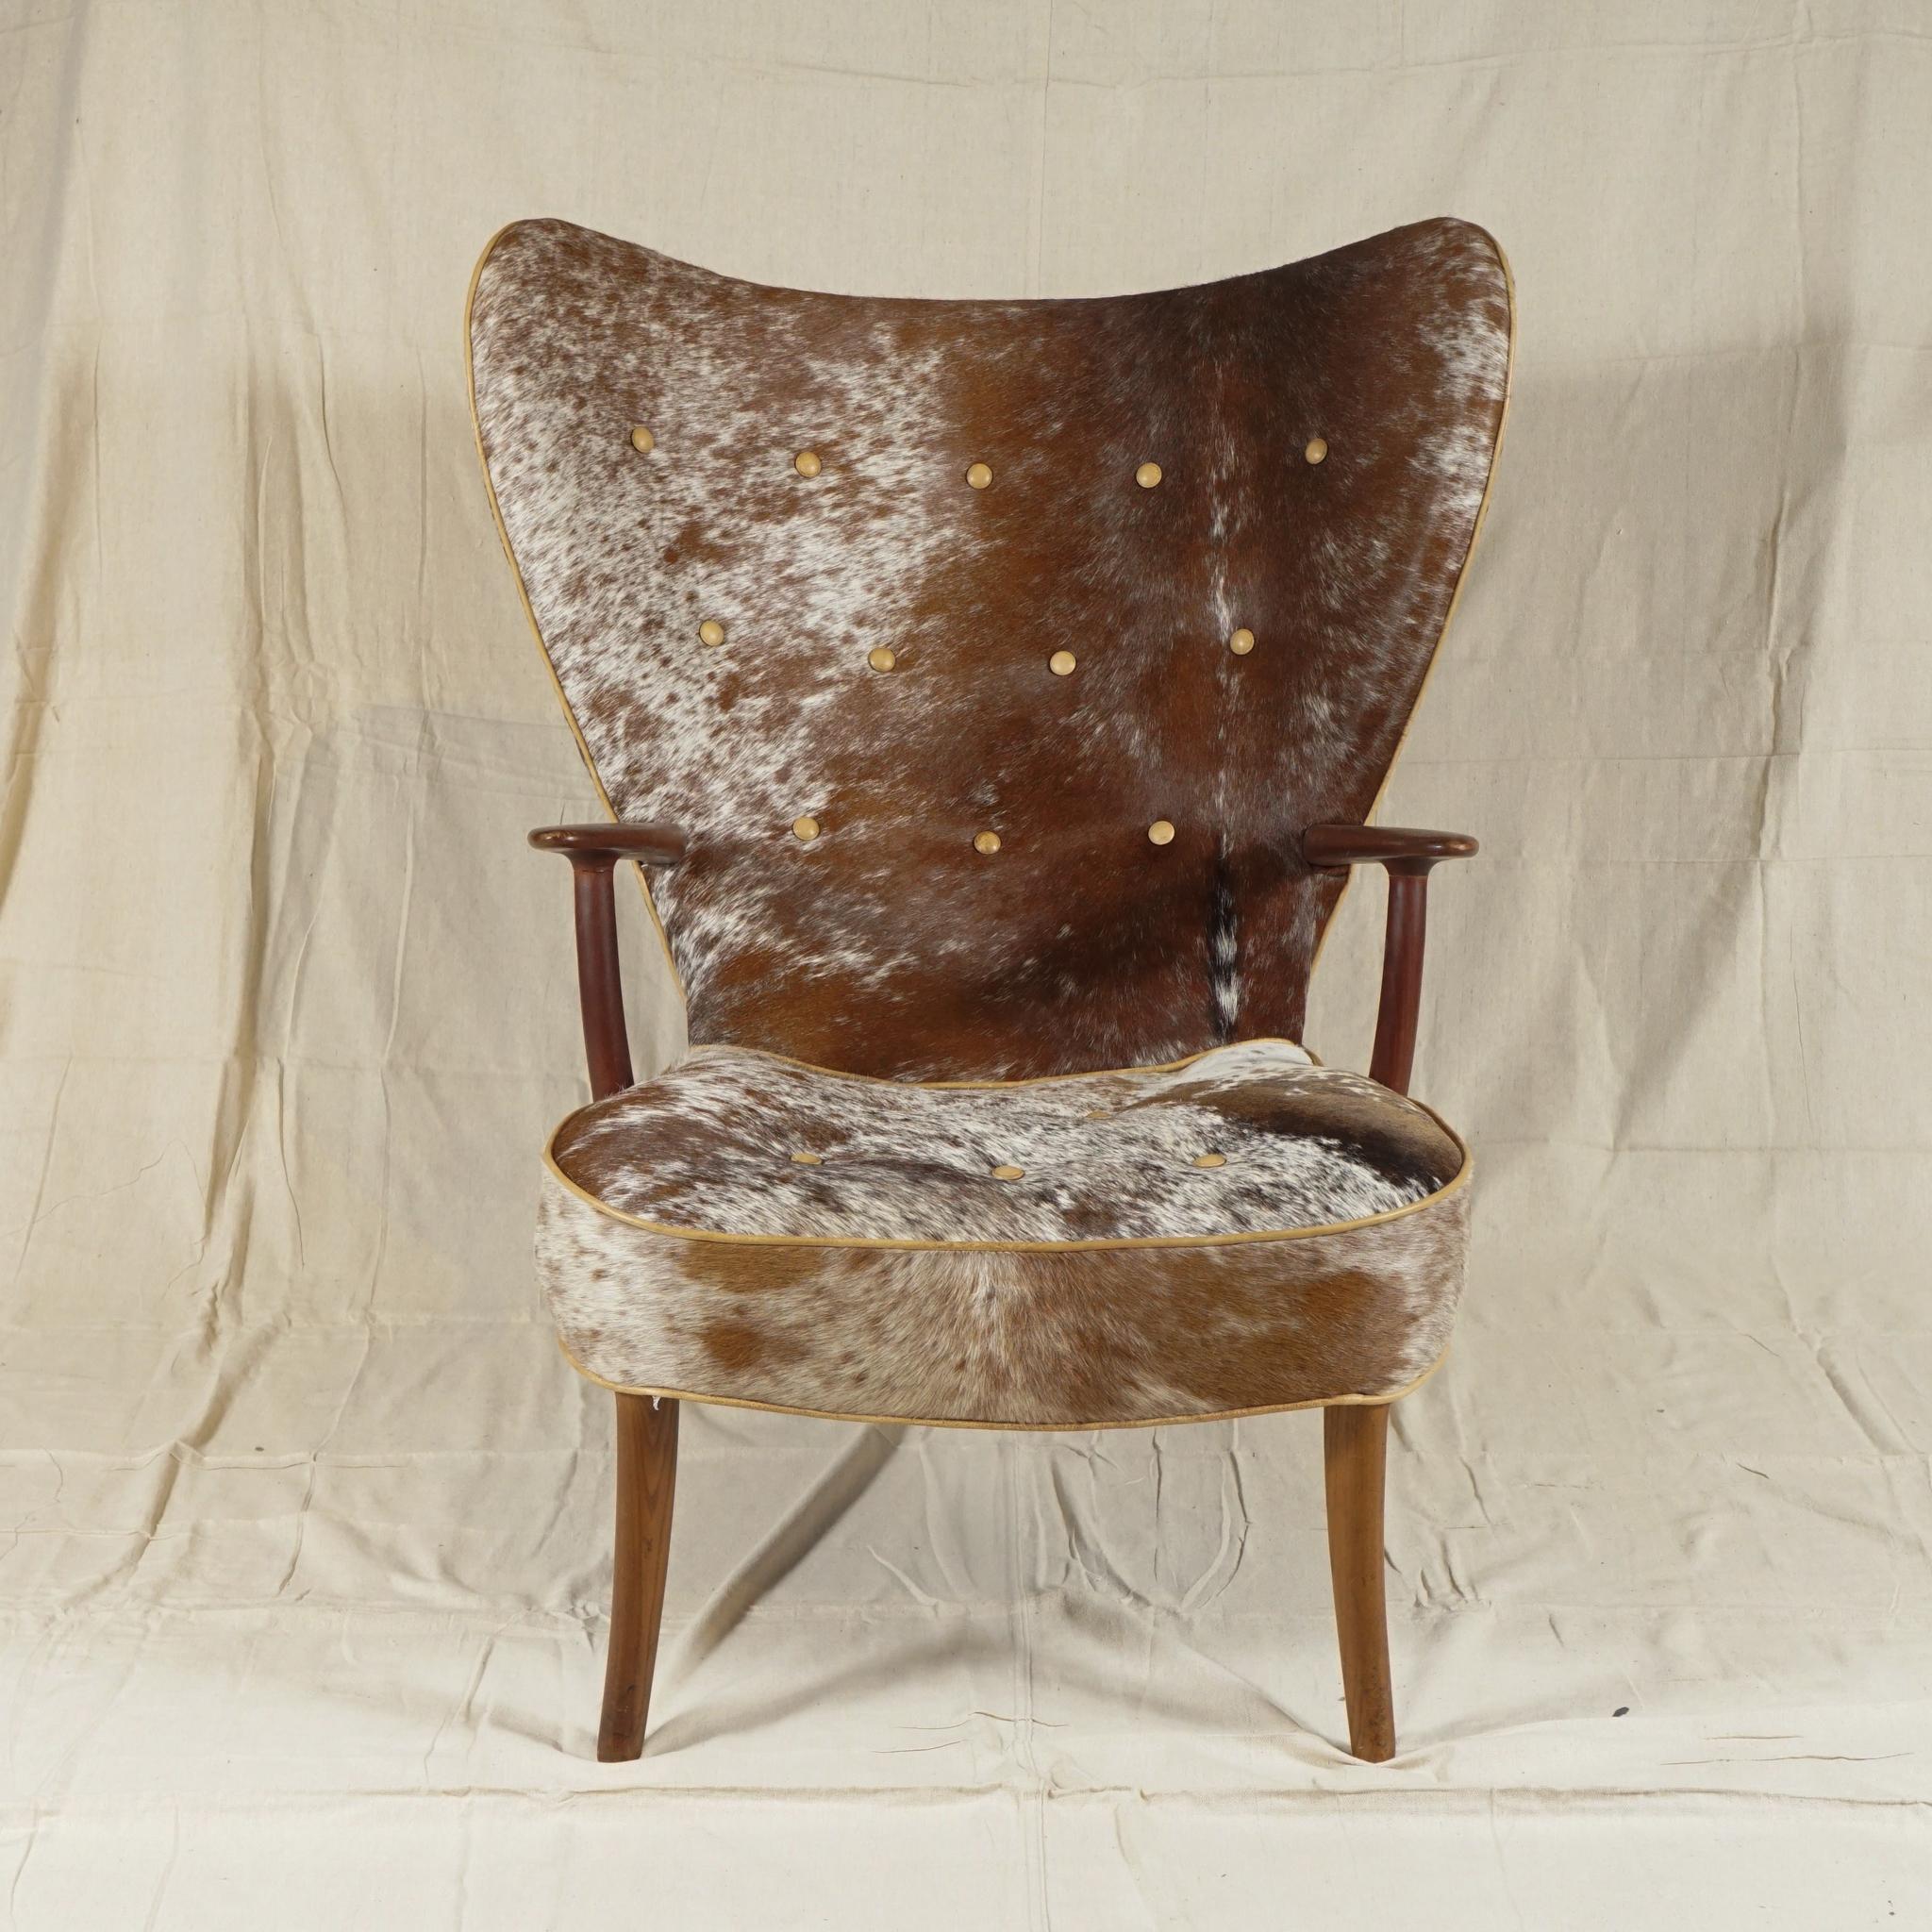 The Pragh chair, a distinctive wingback chair, by Madsen & Schubell, a Danish firm established in 1944 in Copenhagen. Newly recovered in a handsomely patterned soft cowhide, this iconic chair designed by Madsen & Schubell from 1950s is a standout.